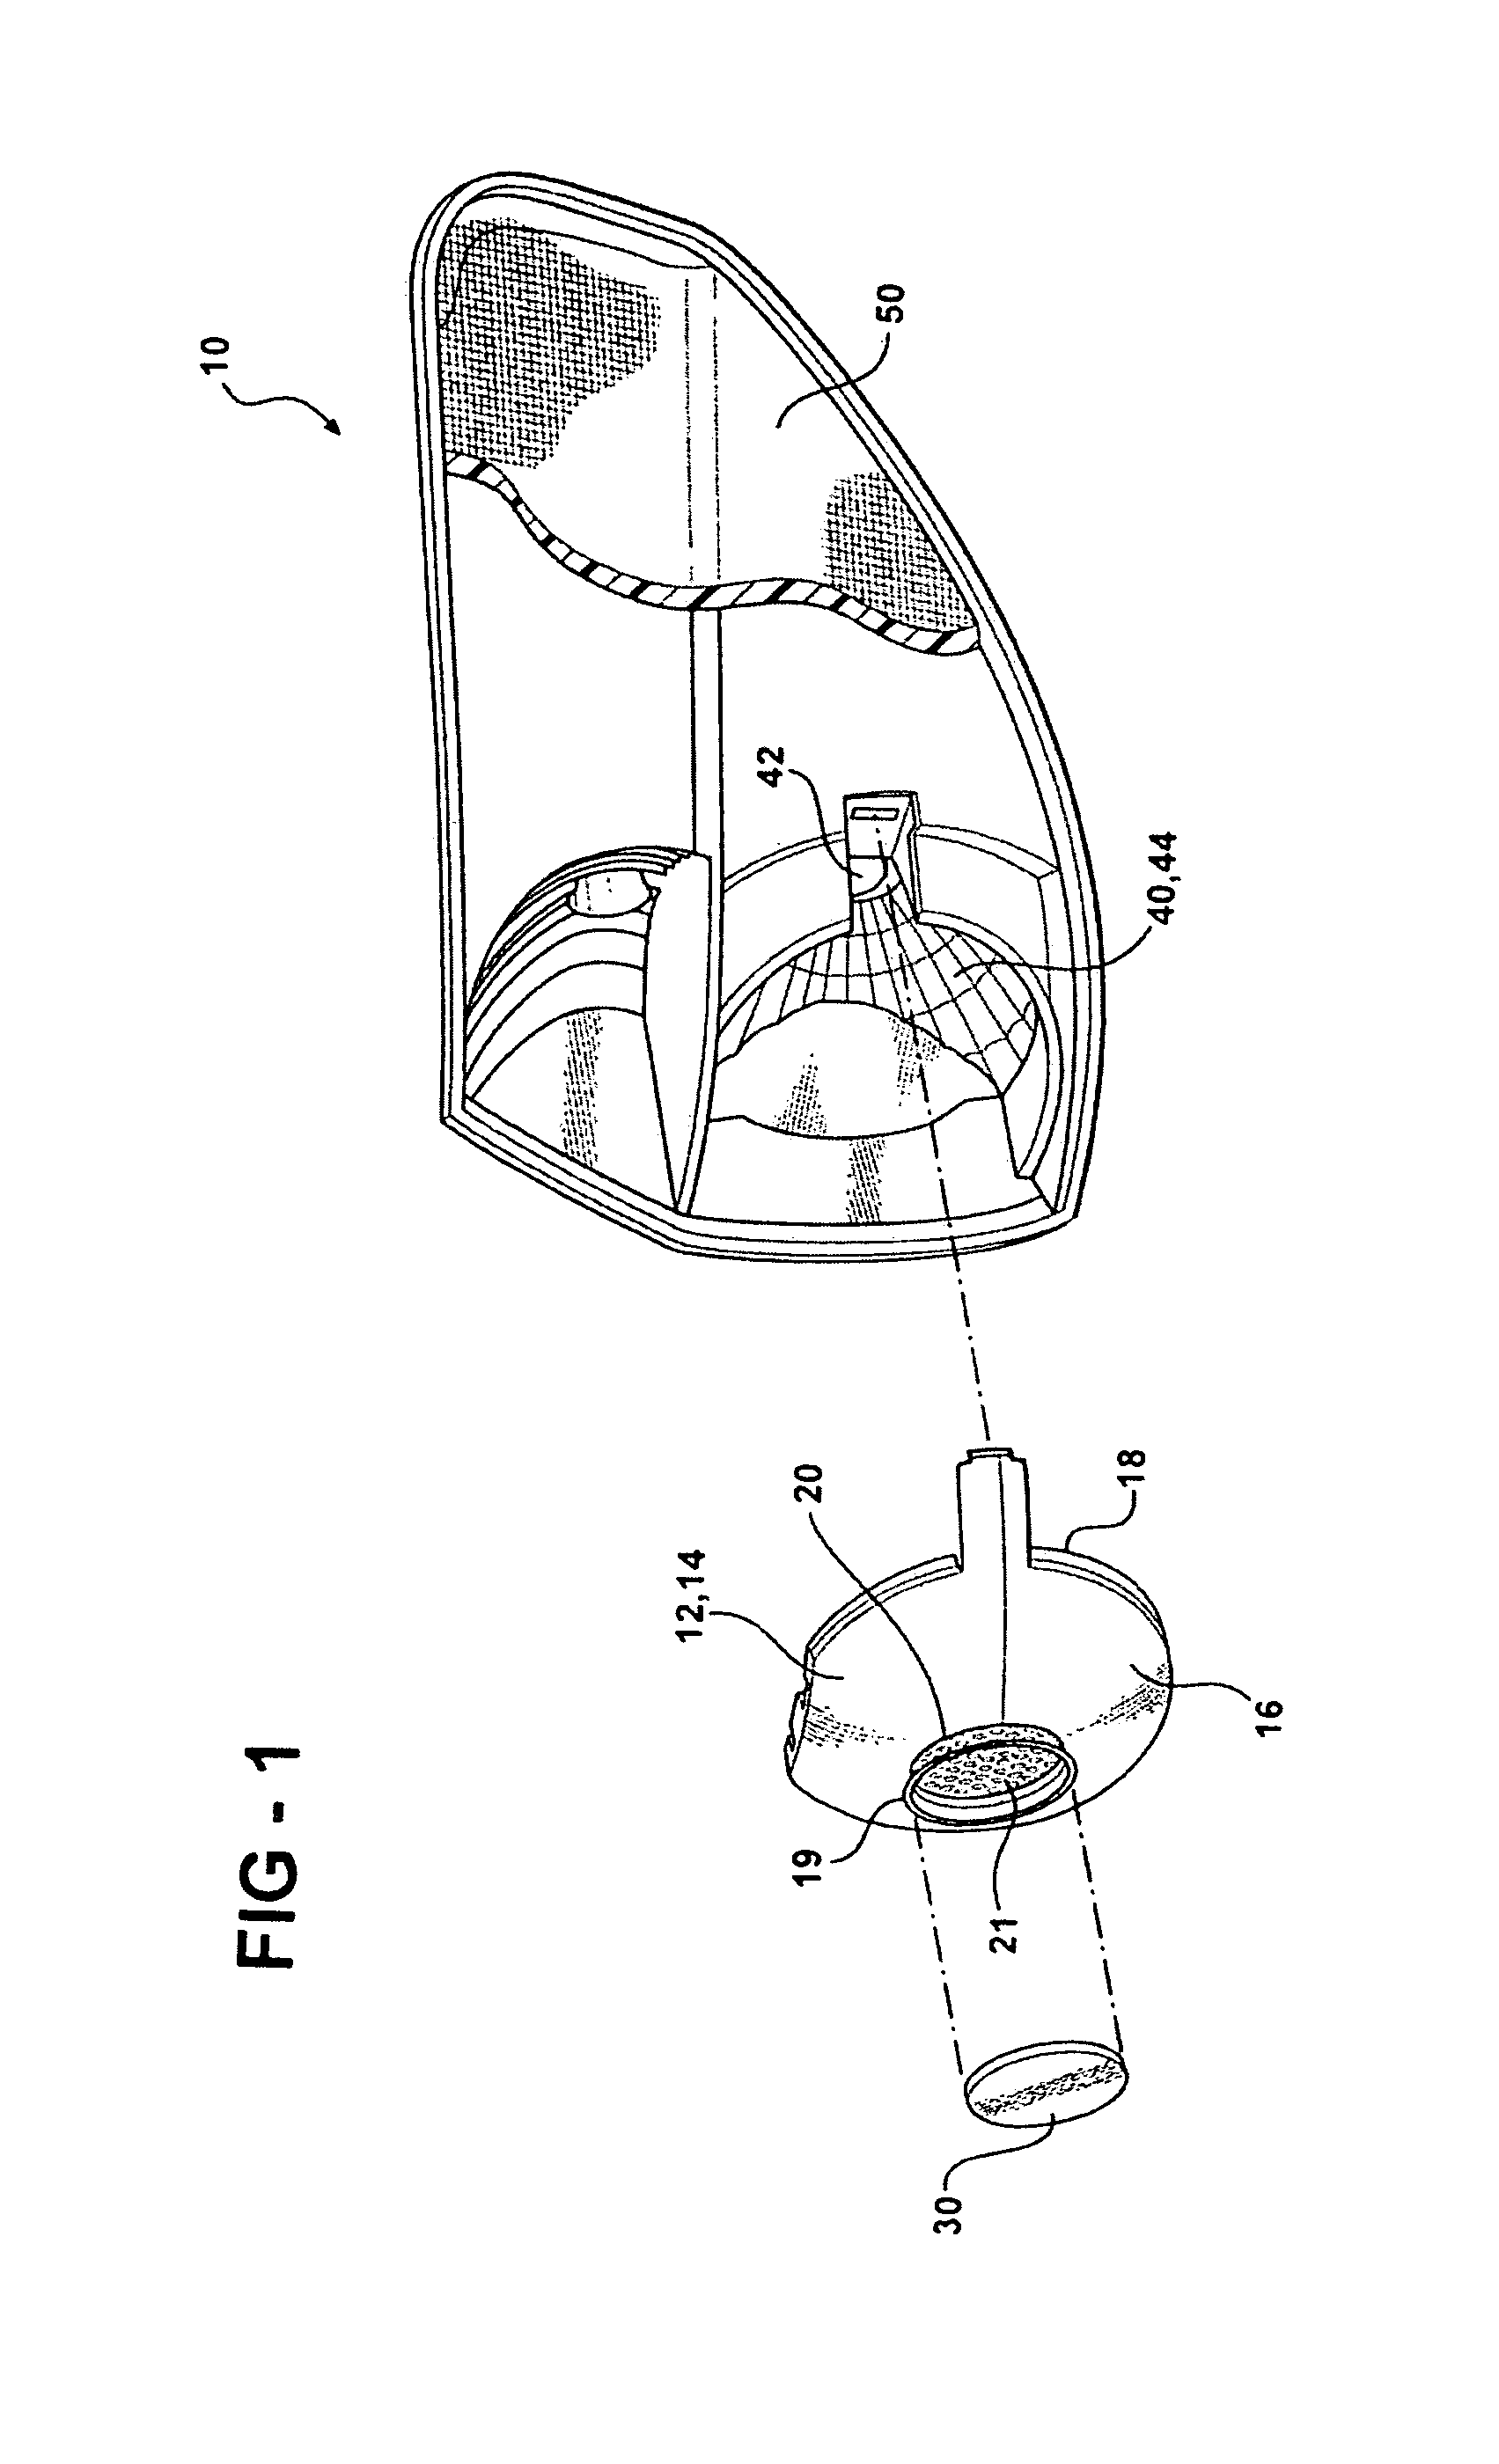 Lens optics used to reduce part deformation due to heat